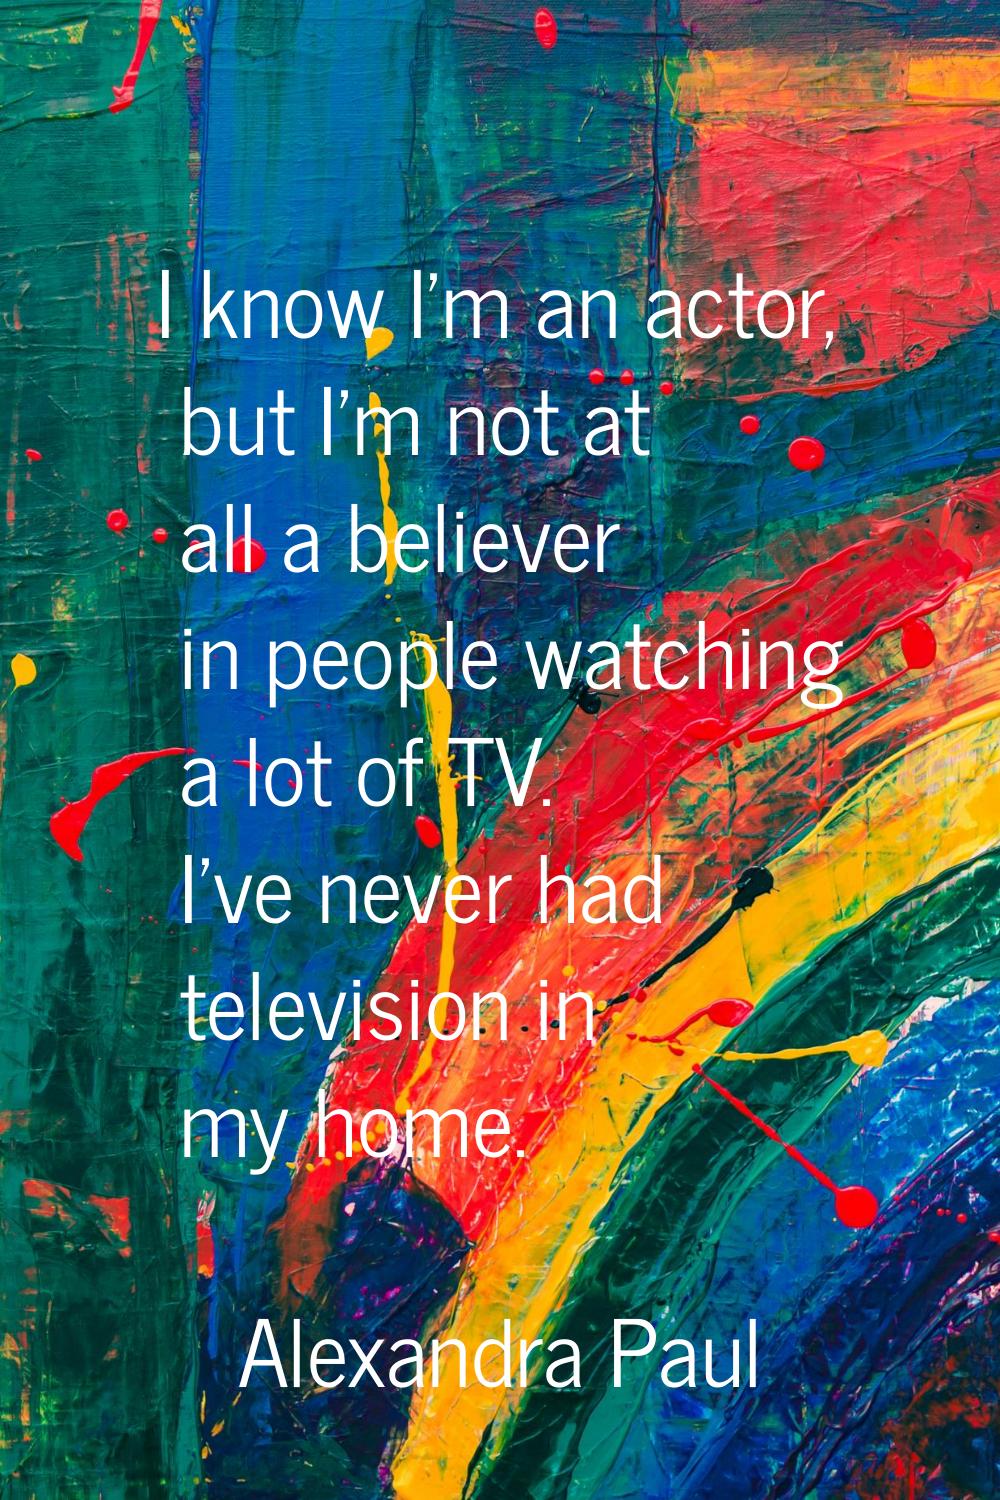 I know I'm an actor, but I'm not at all a believer in people watching a lot of TV. I've never had t